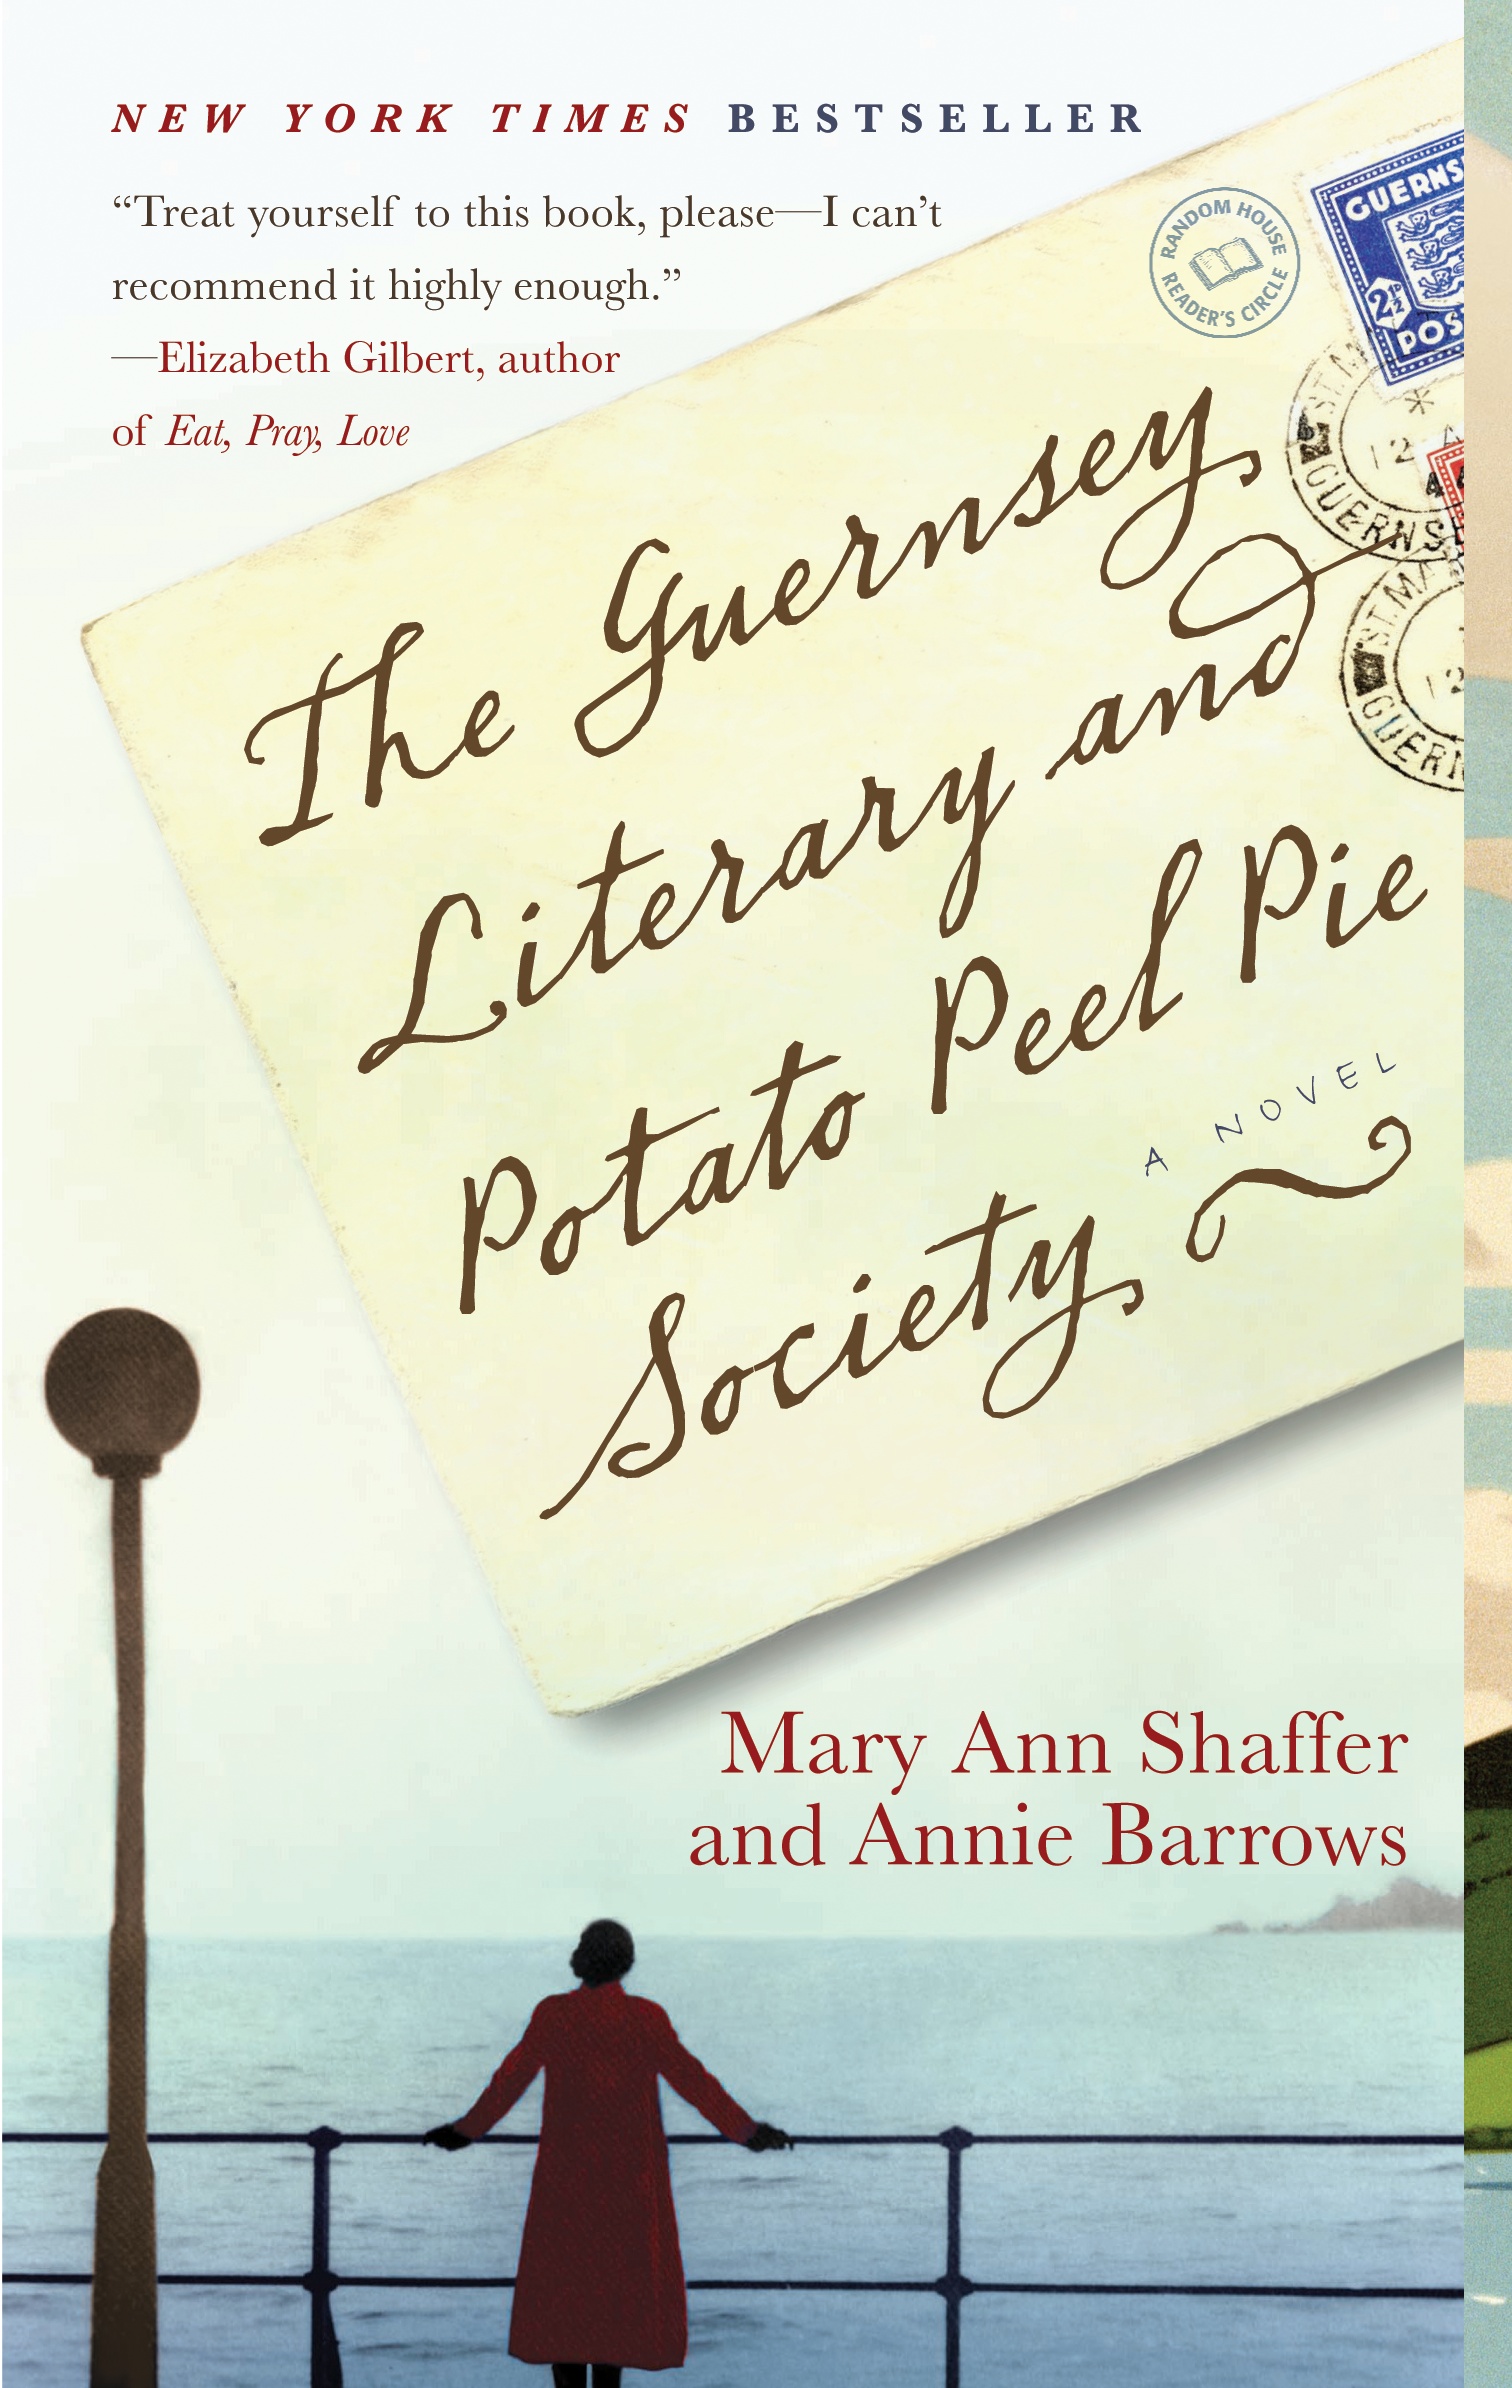 Book Review: The Guernsey Literary and Potato Peel Pie Society by Mary